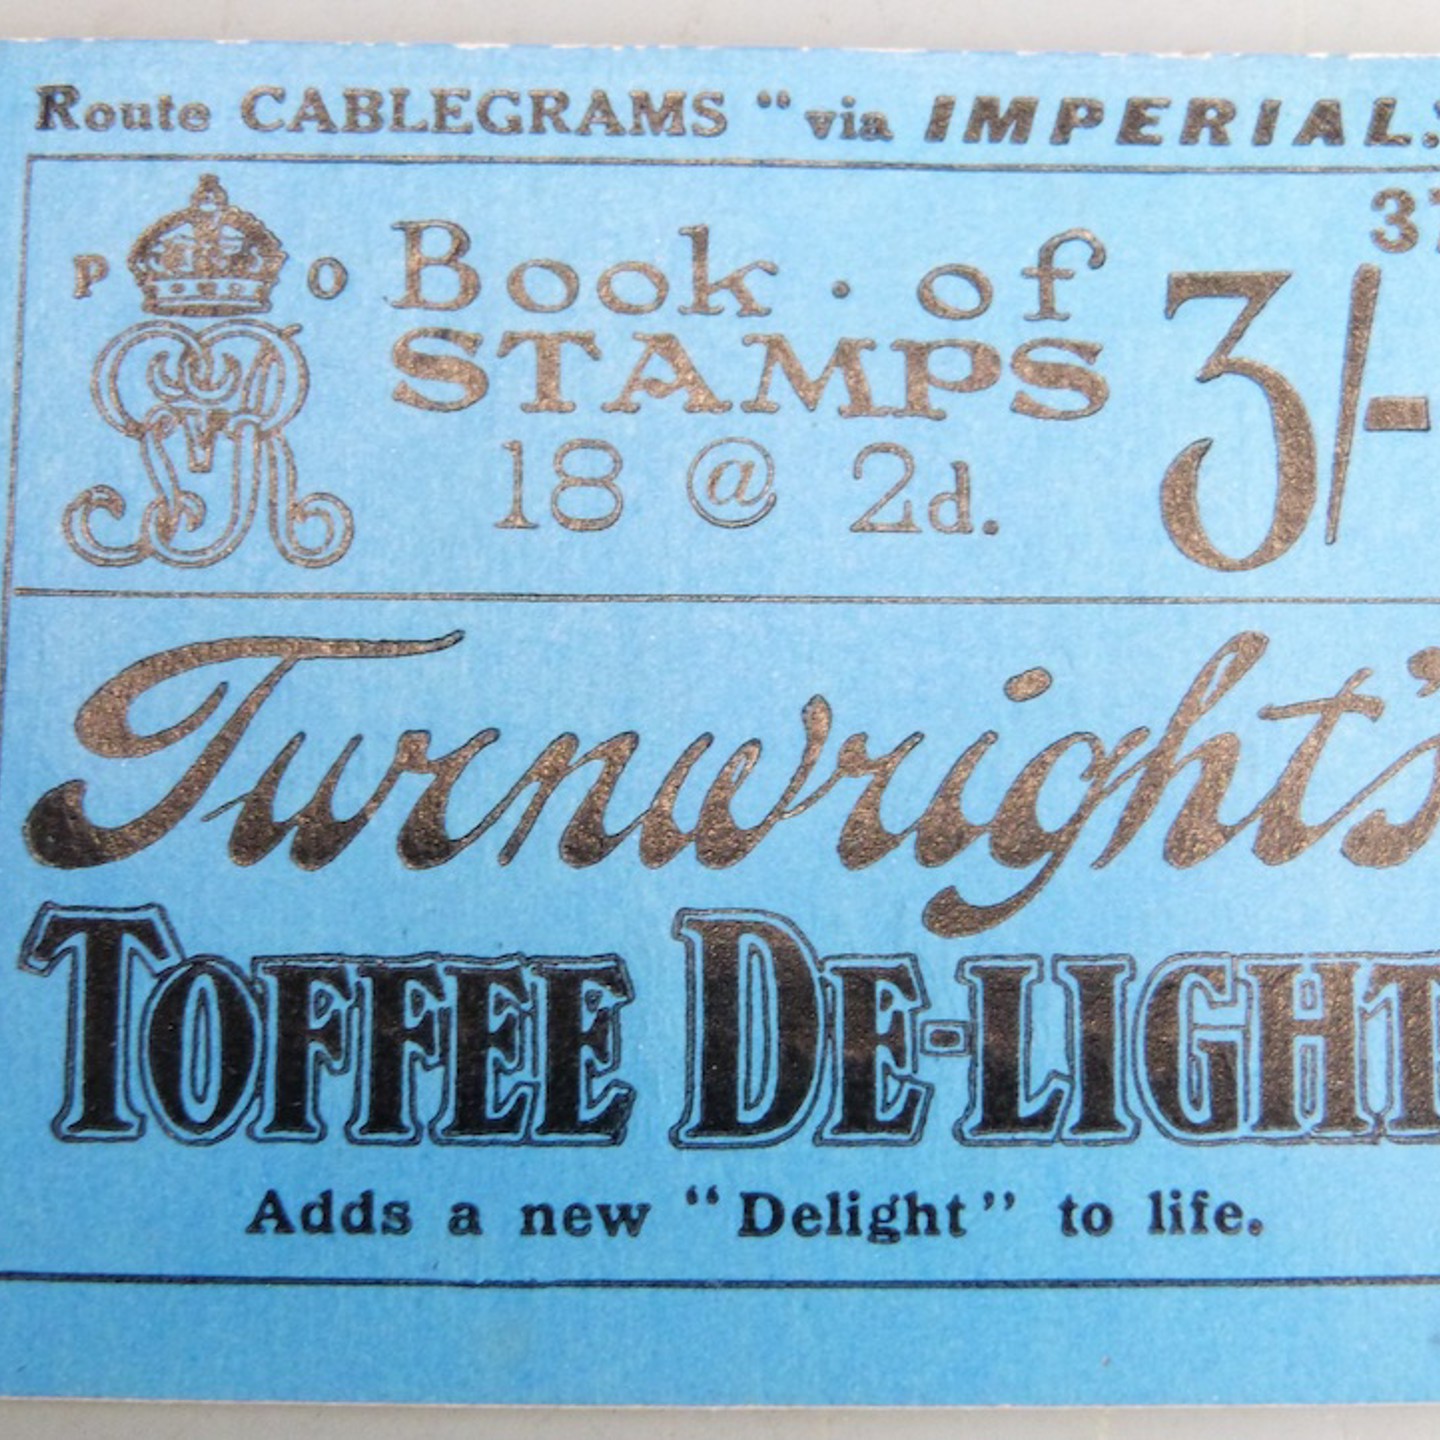 George V Three Shilling Stamp Booklet Advertising Turnwright's Toffee Delight HAMMER £440